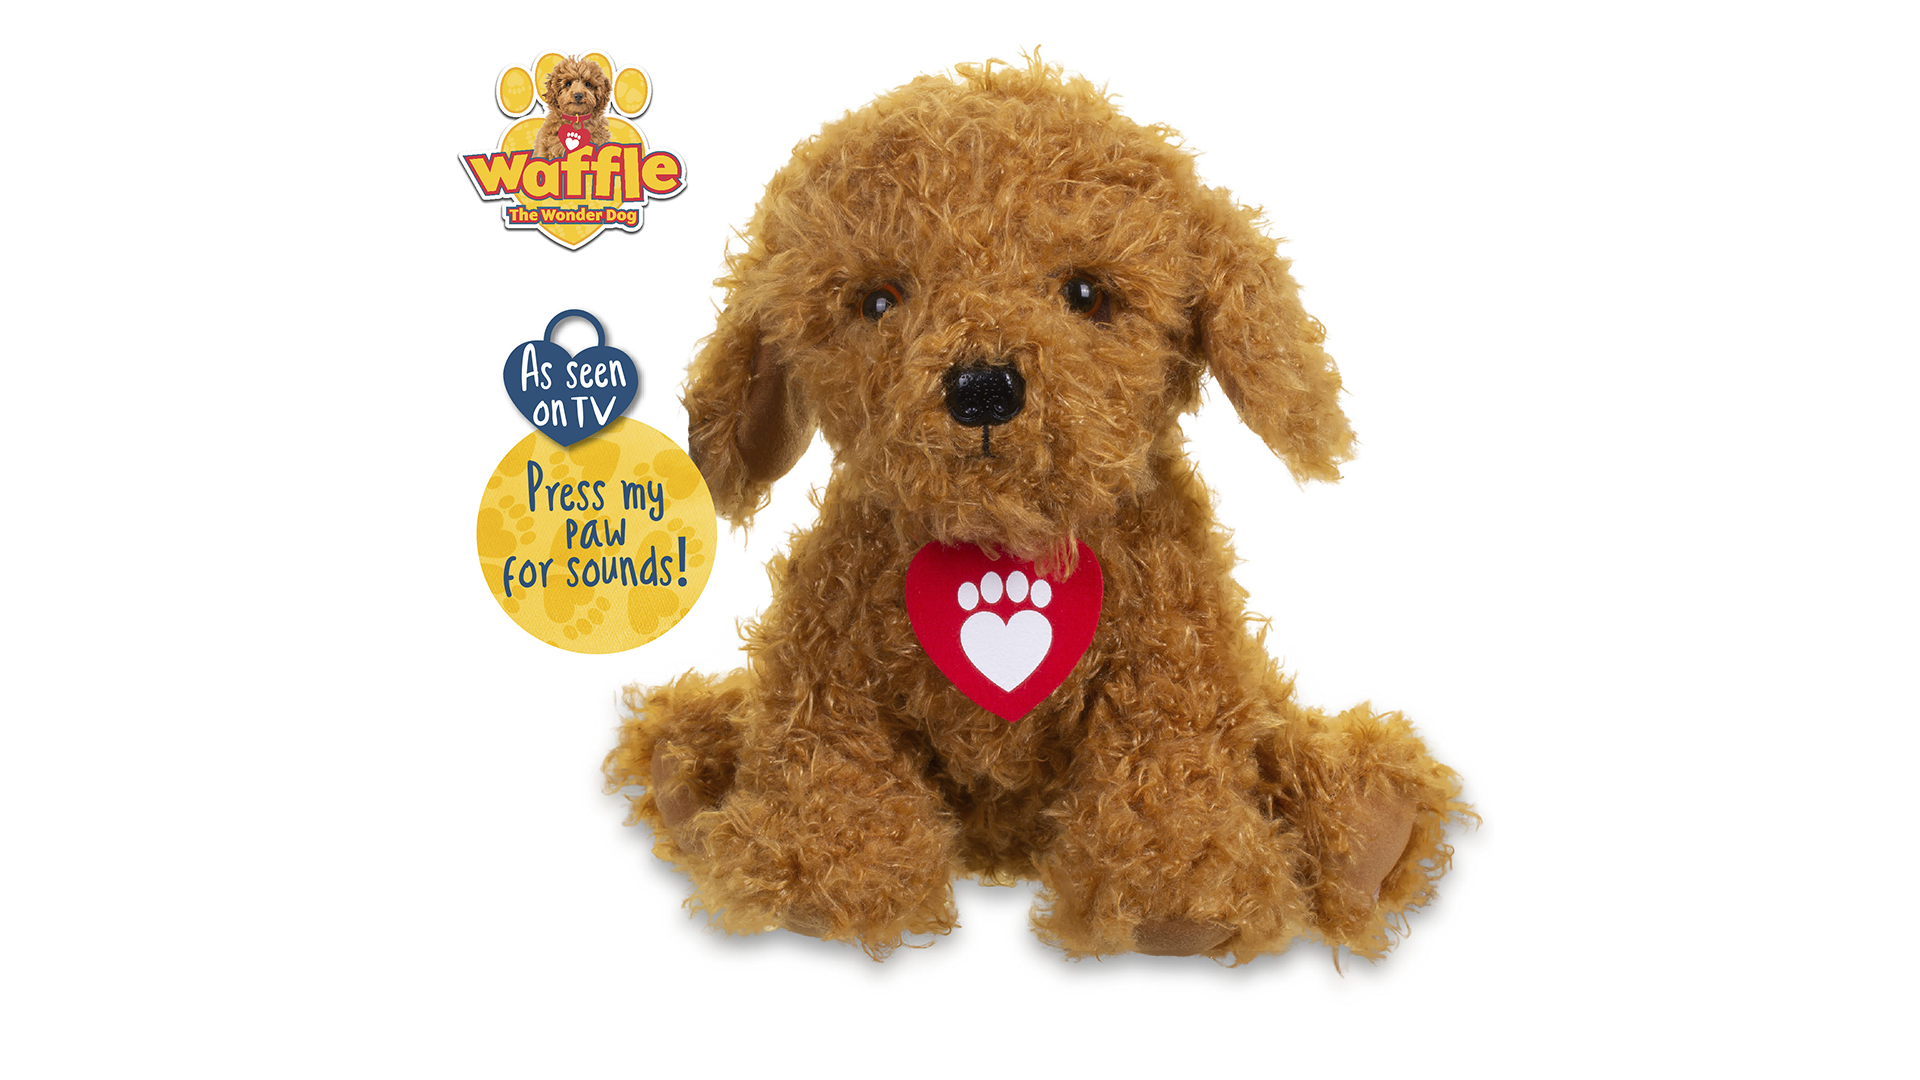 Waffle the Wonder Dog Soft Toy With Sounds